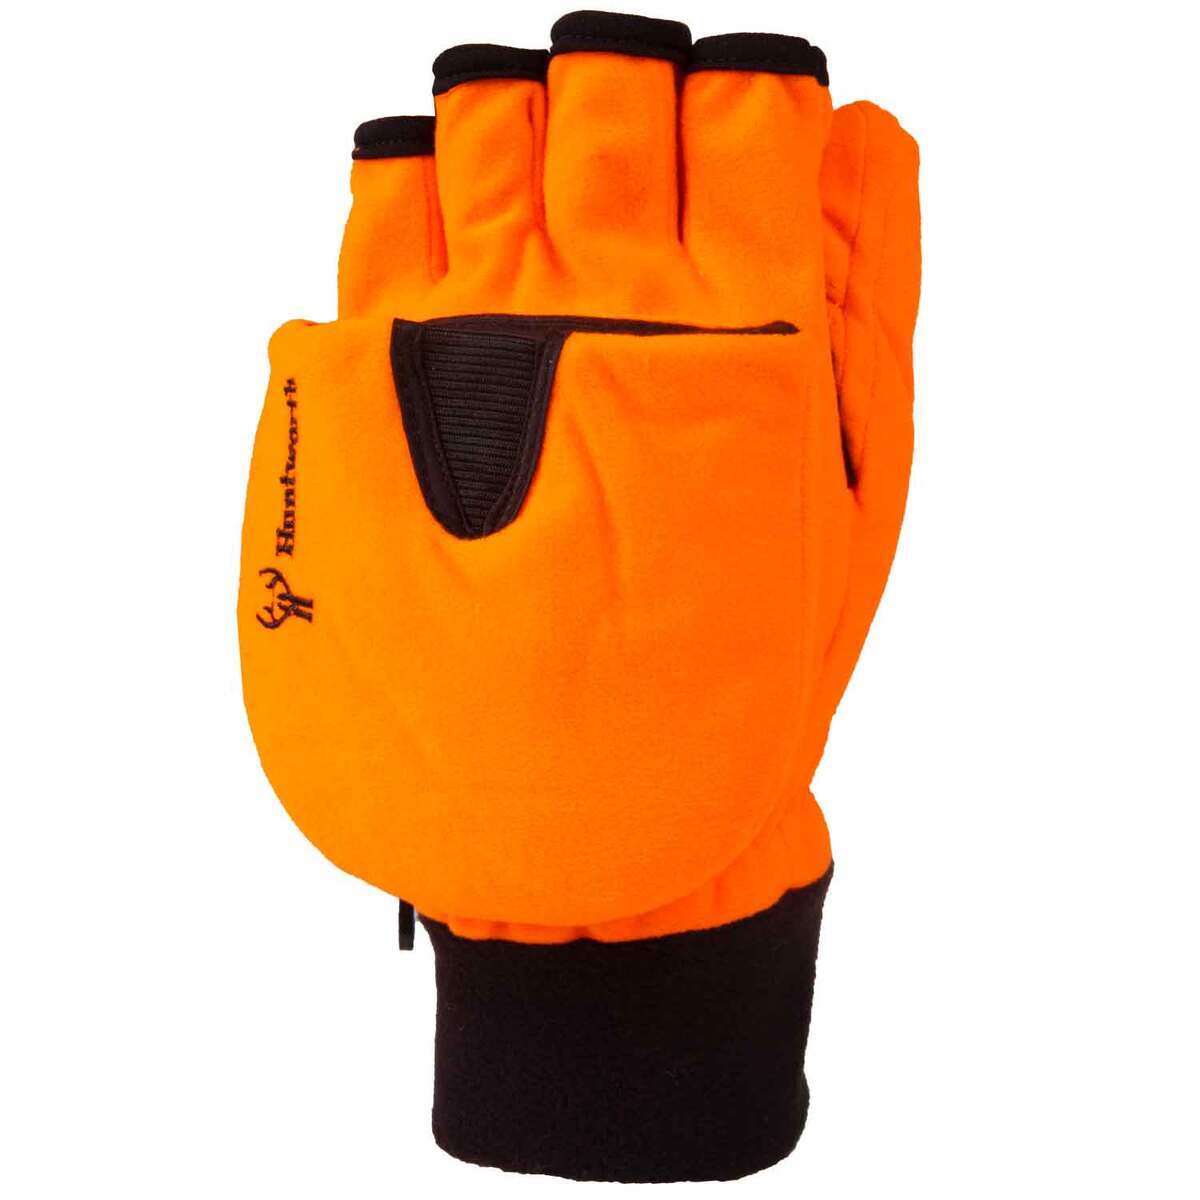 Rubber Hand Glove Archives - Anaps Safety